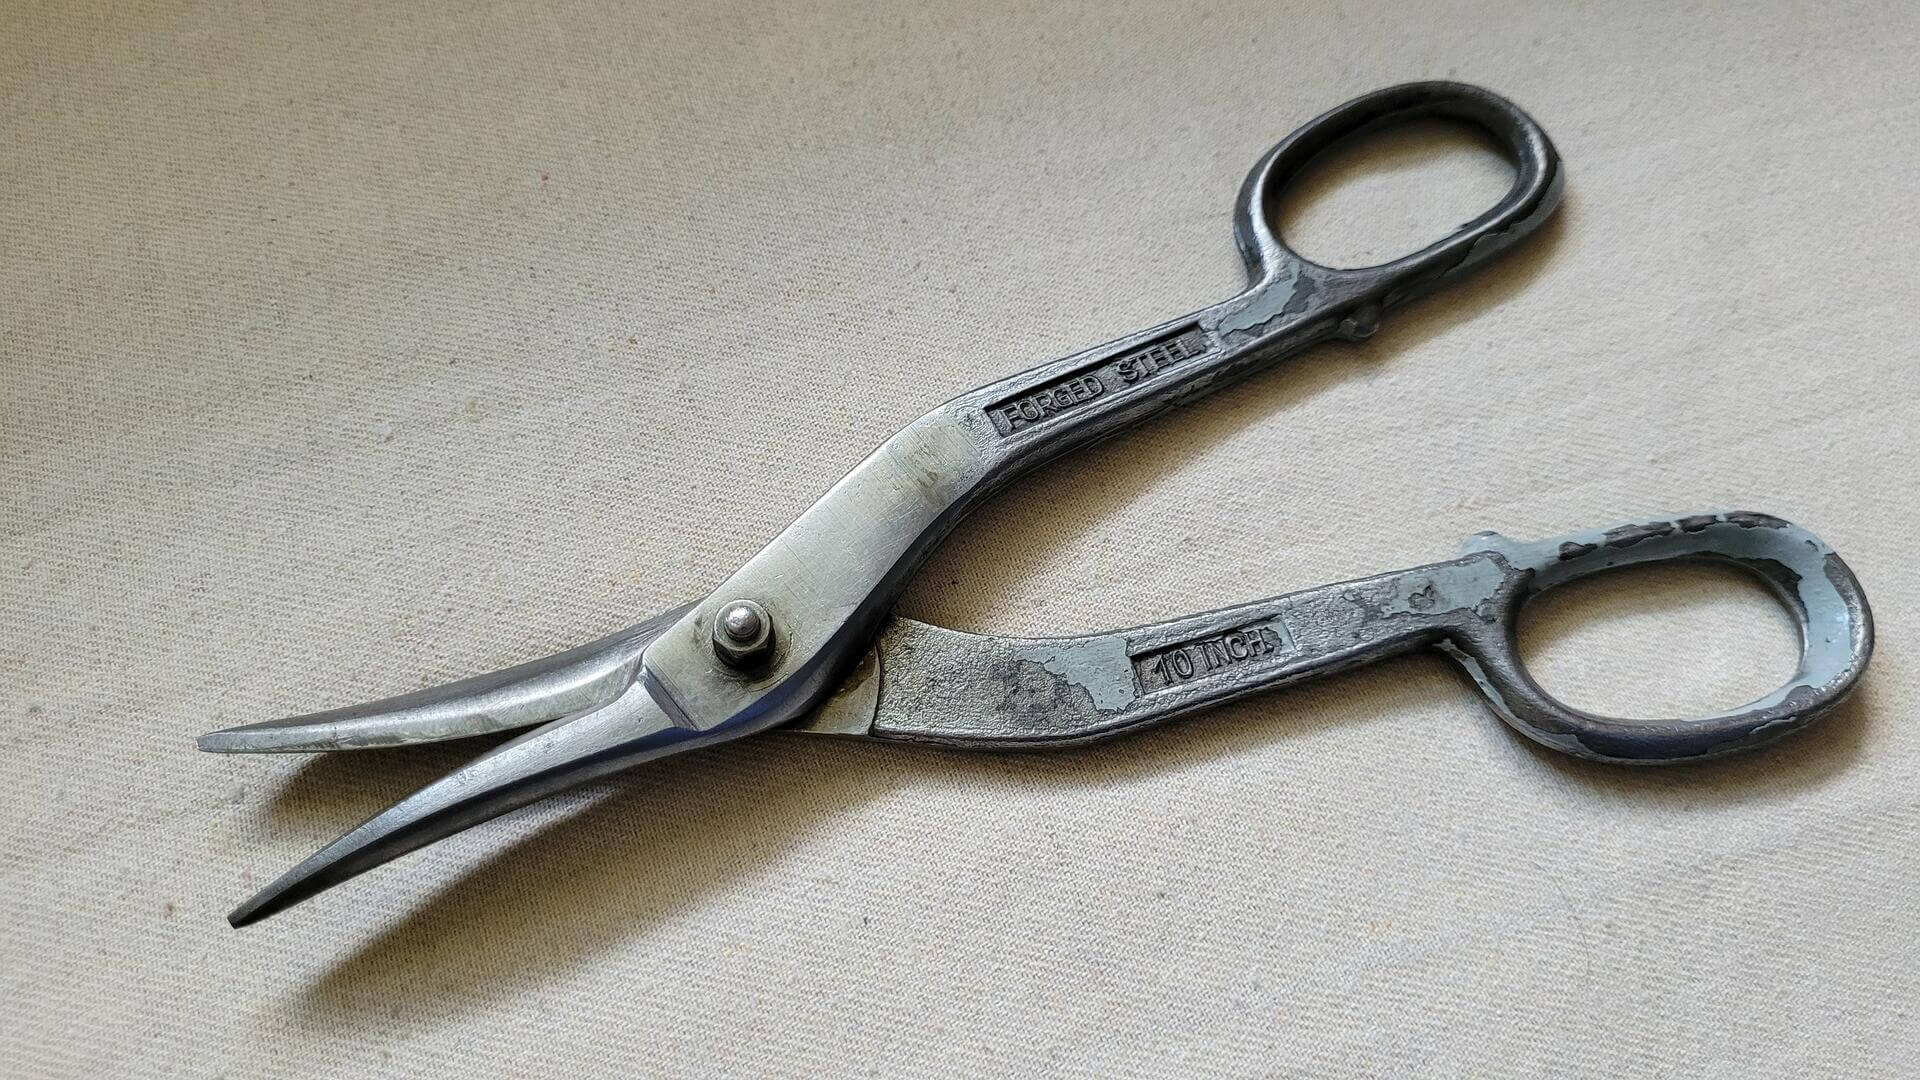 Rare 10 Inch Forged Steel Tin Snips Made in Germany by Ardex also known as the last Canadian axe maker - antique and vintage collectible cutting hand tools